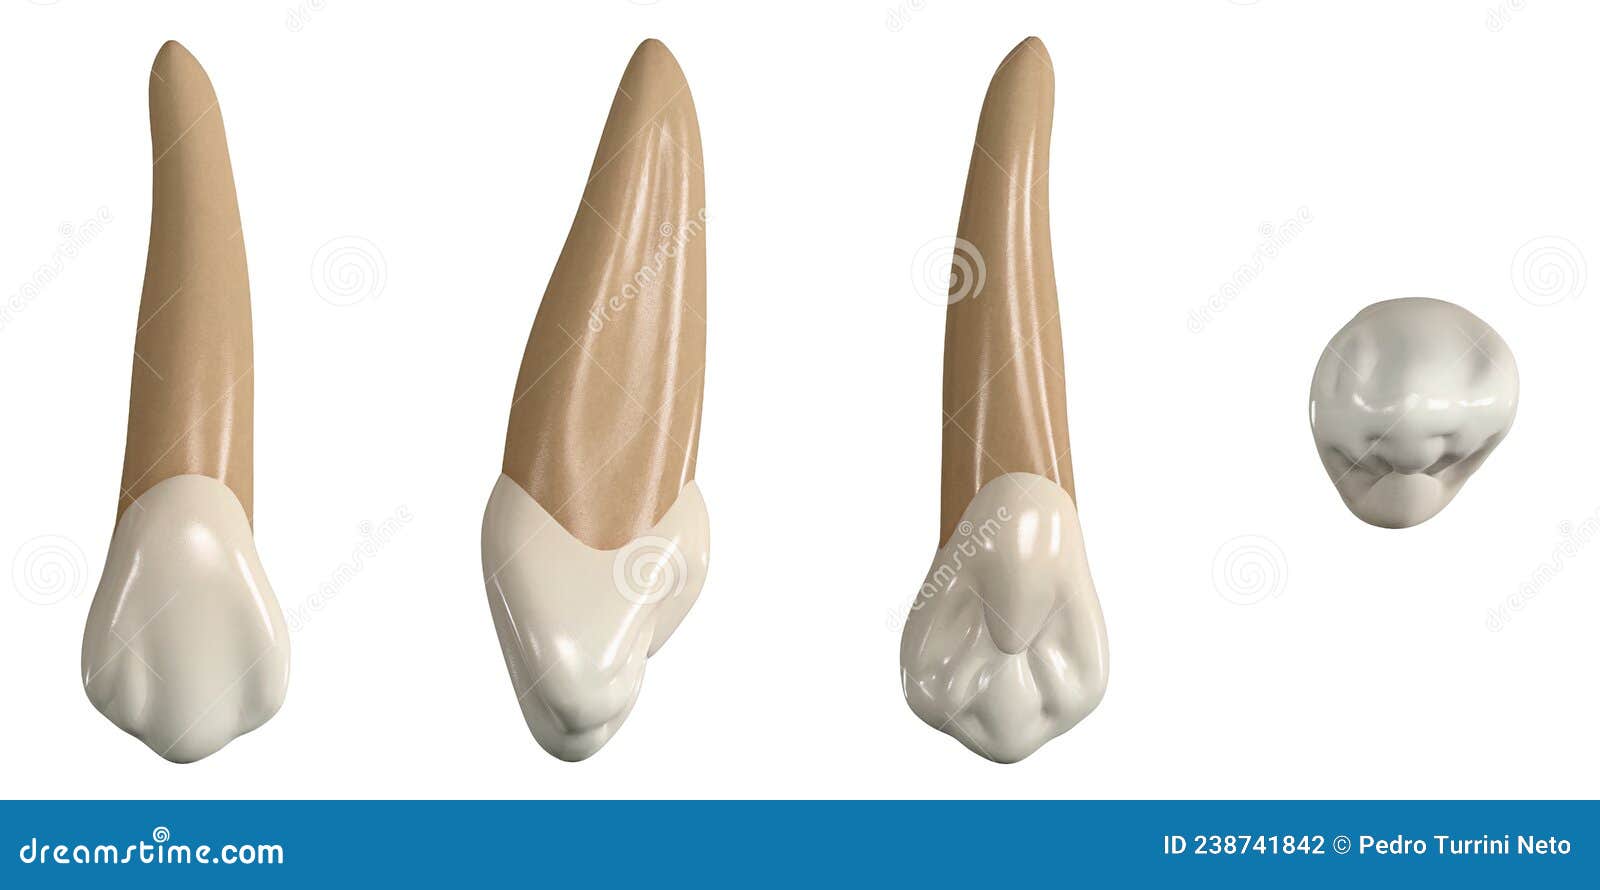 Permanent Upper Second Premolar Tooth 3d Illustration Of The Anatomy